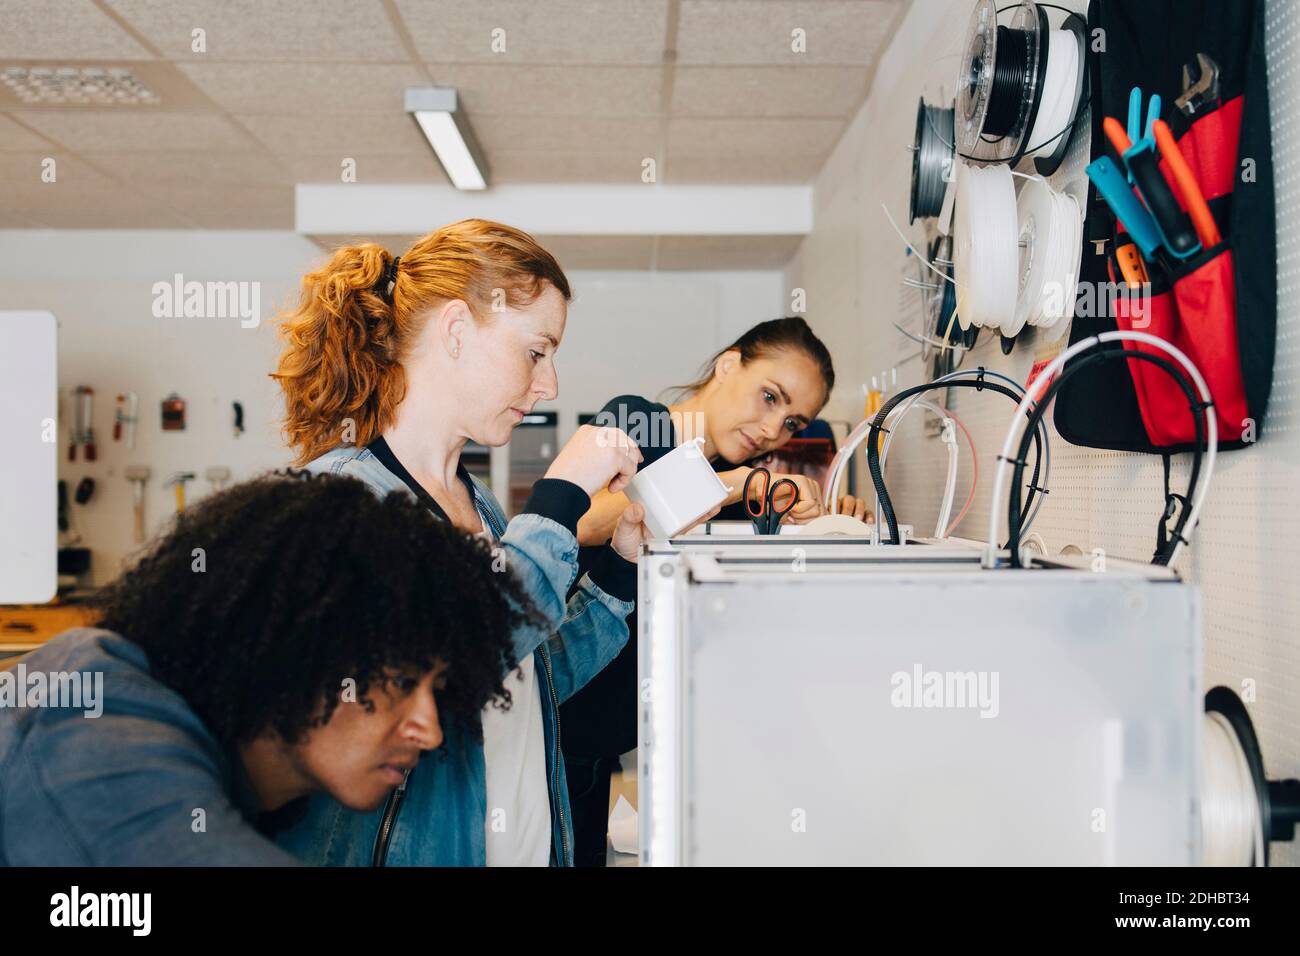 Multi-ethnic male and female engineers working on machinery at creative office Stock Photo